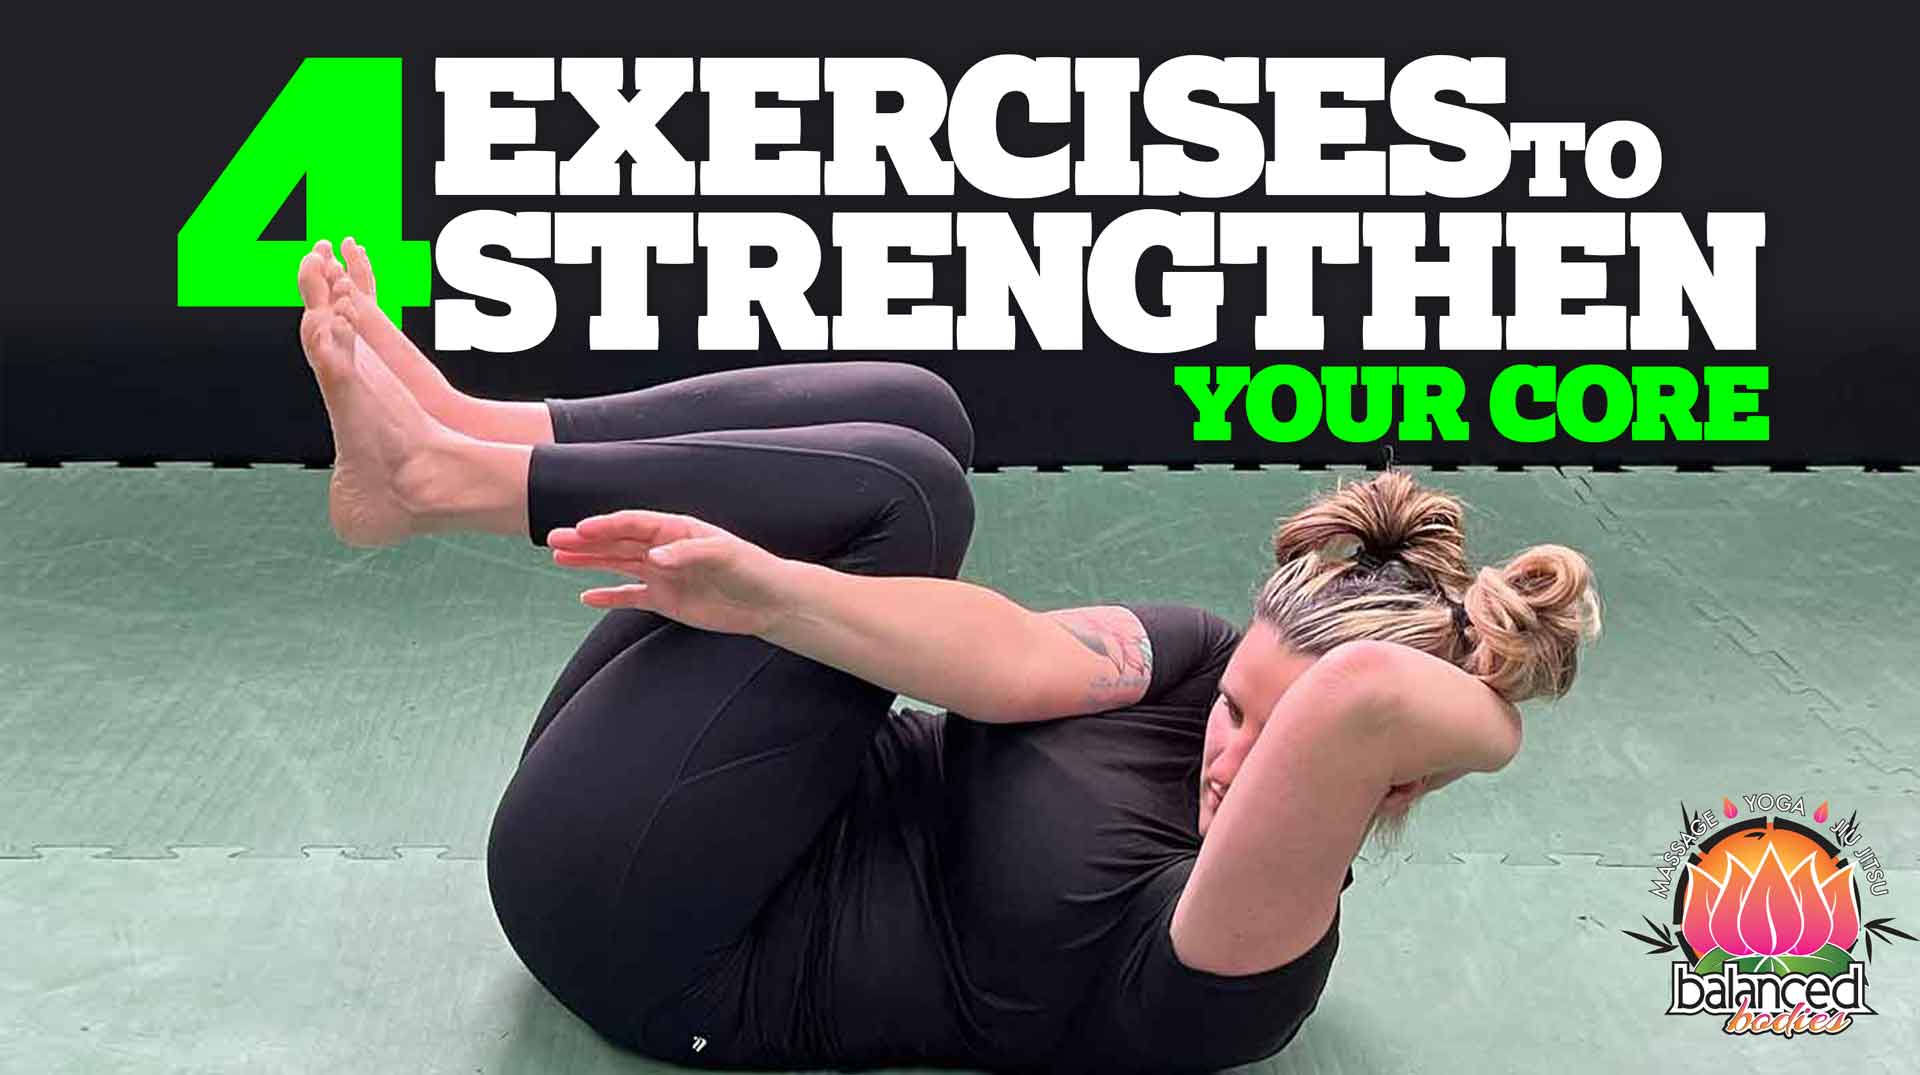 Four Exercises to Strengthen your Core